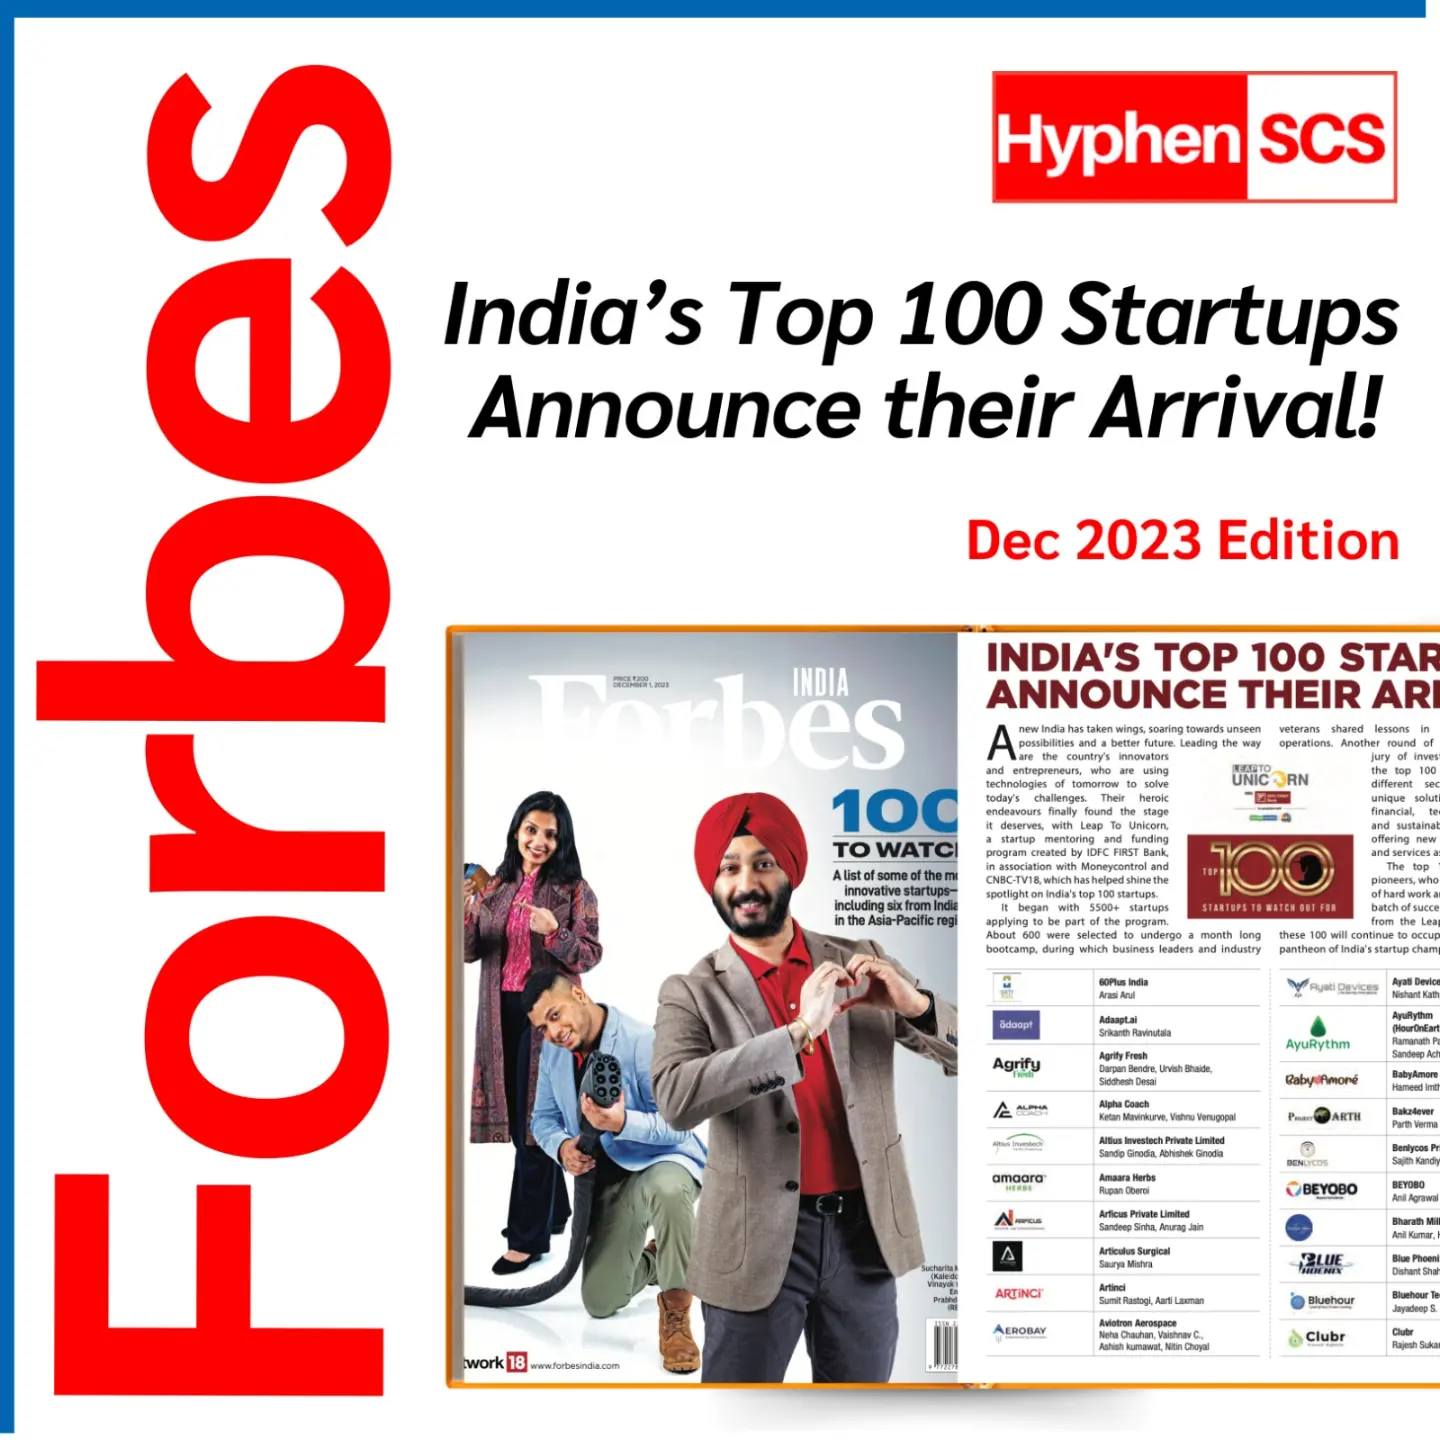 Hyphen SCS: A Rising Star in Forbes India’s Top 100 Startups